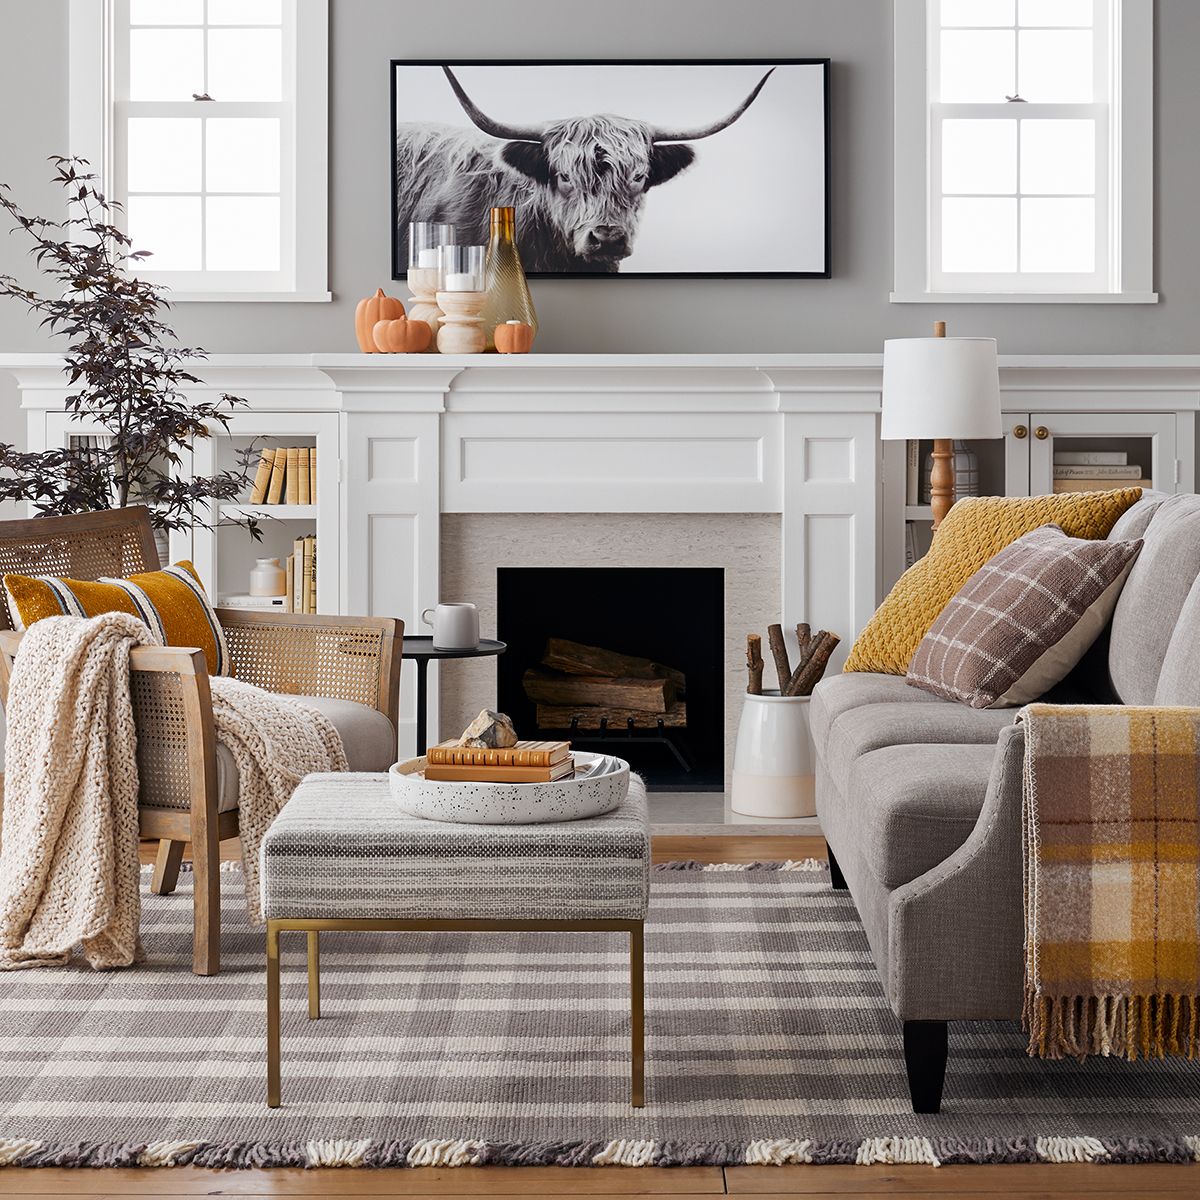 Target\'s New Fall Home Collections - Best Target Fall Decor Items